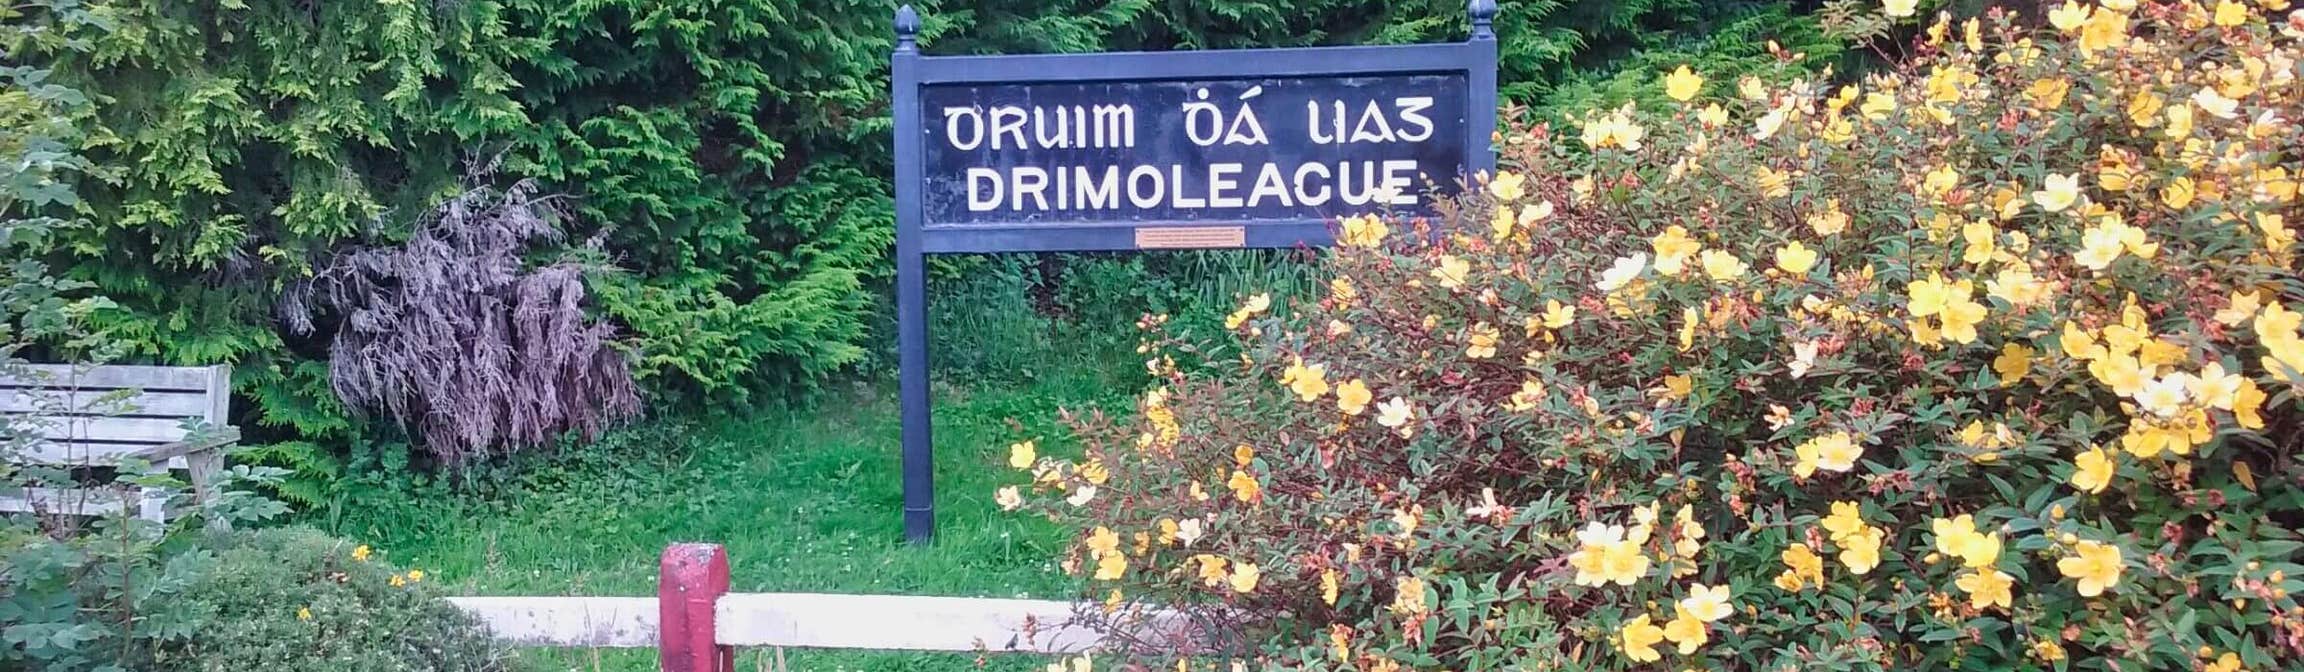 Image of a sign in Drimoleague in County Cork